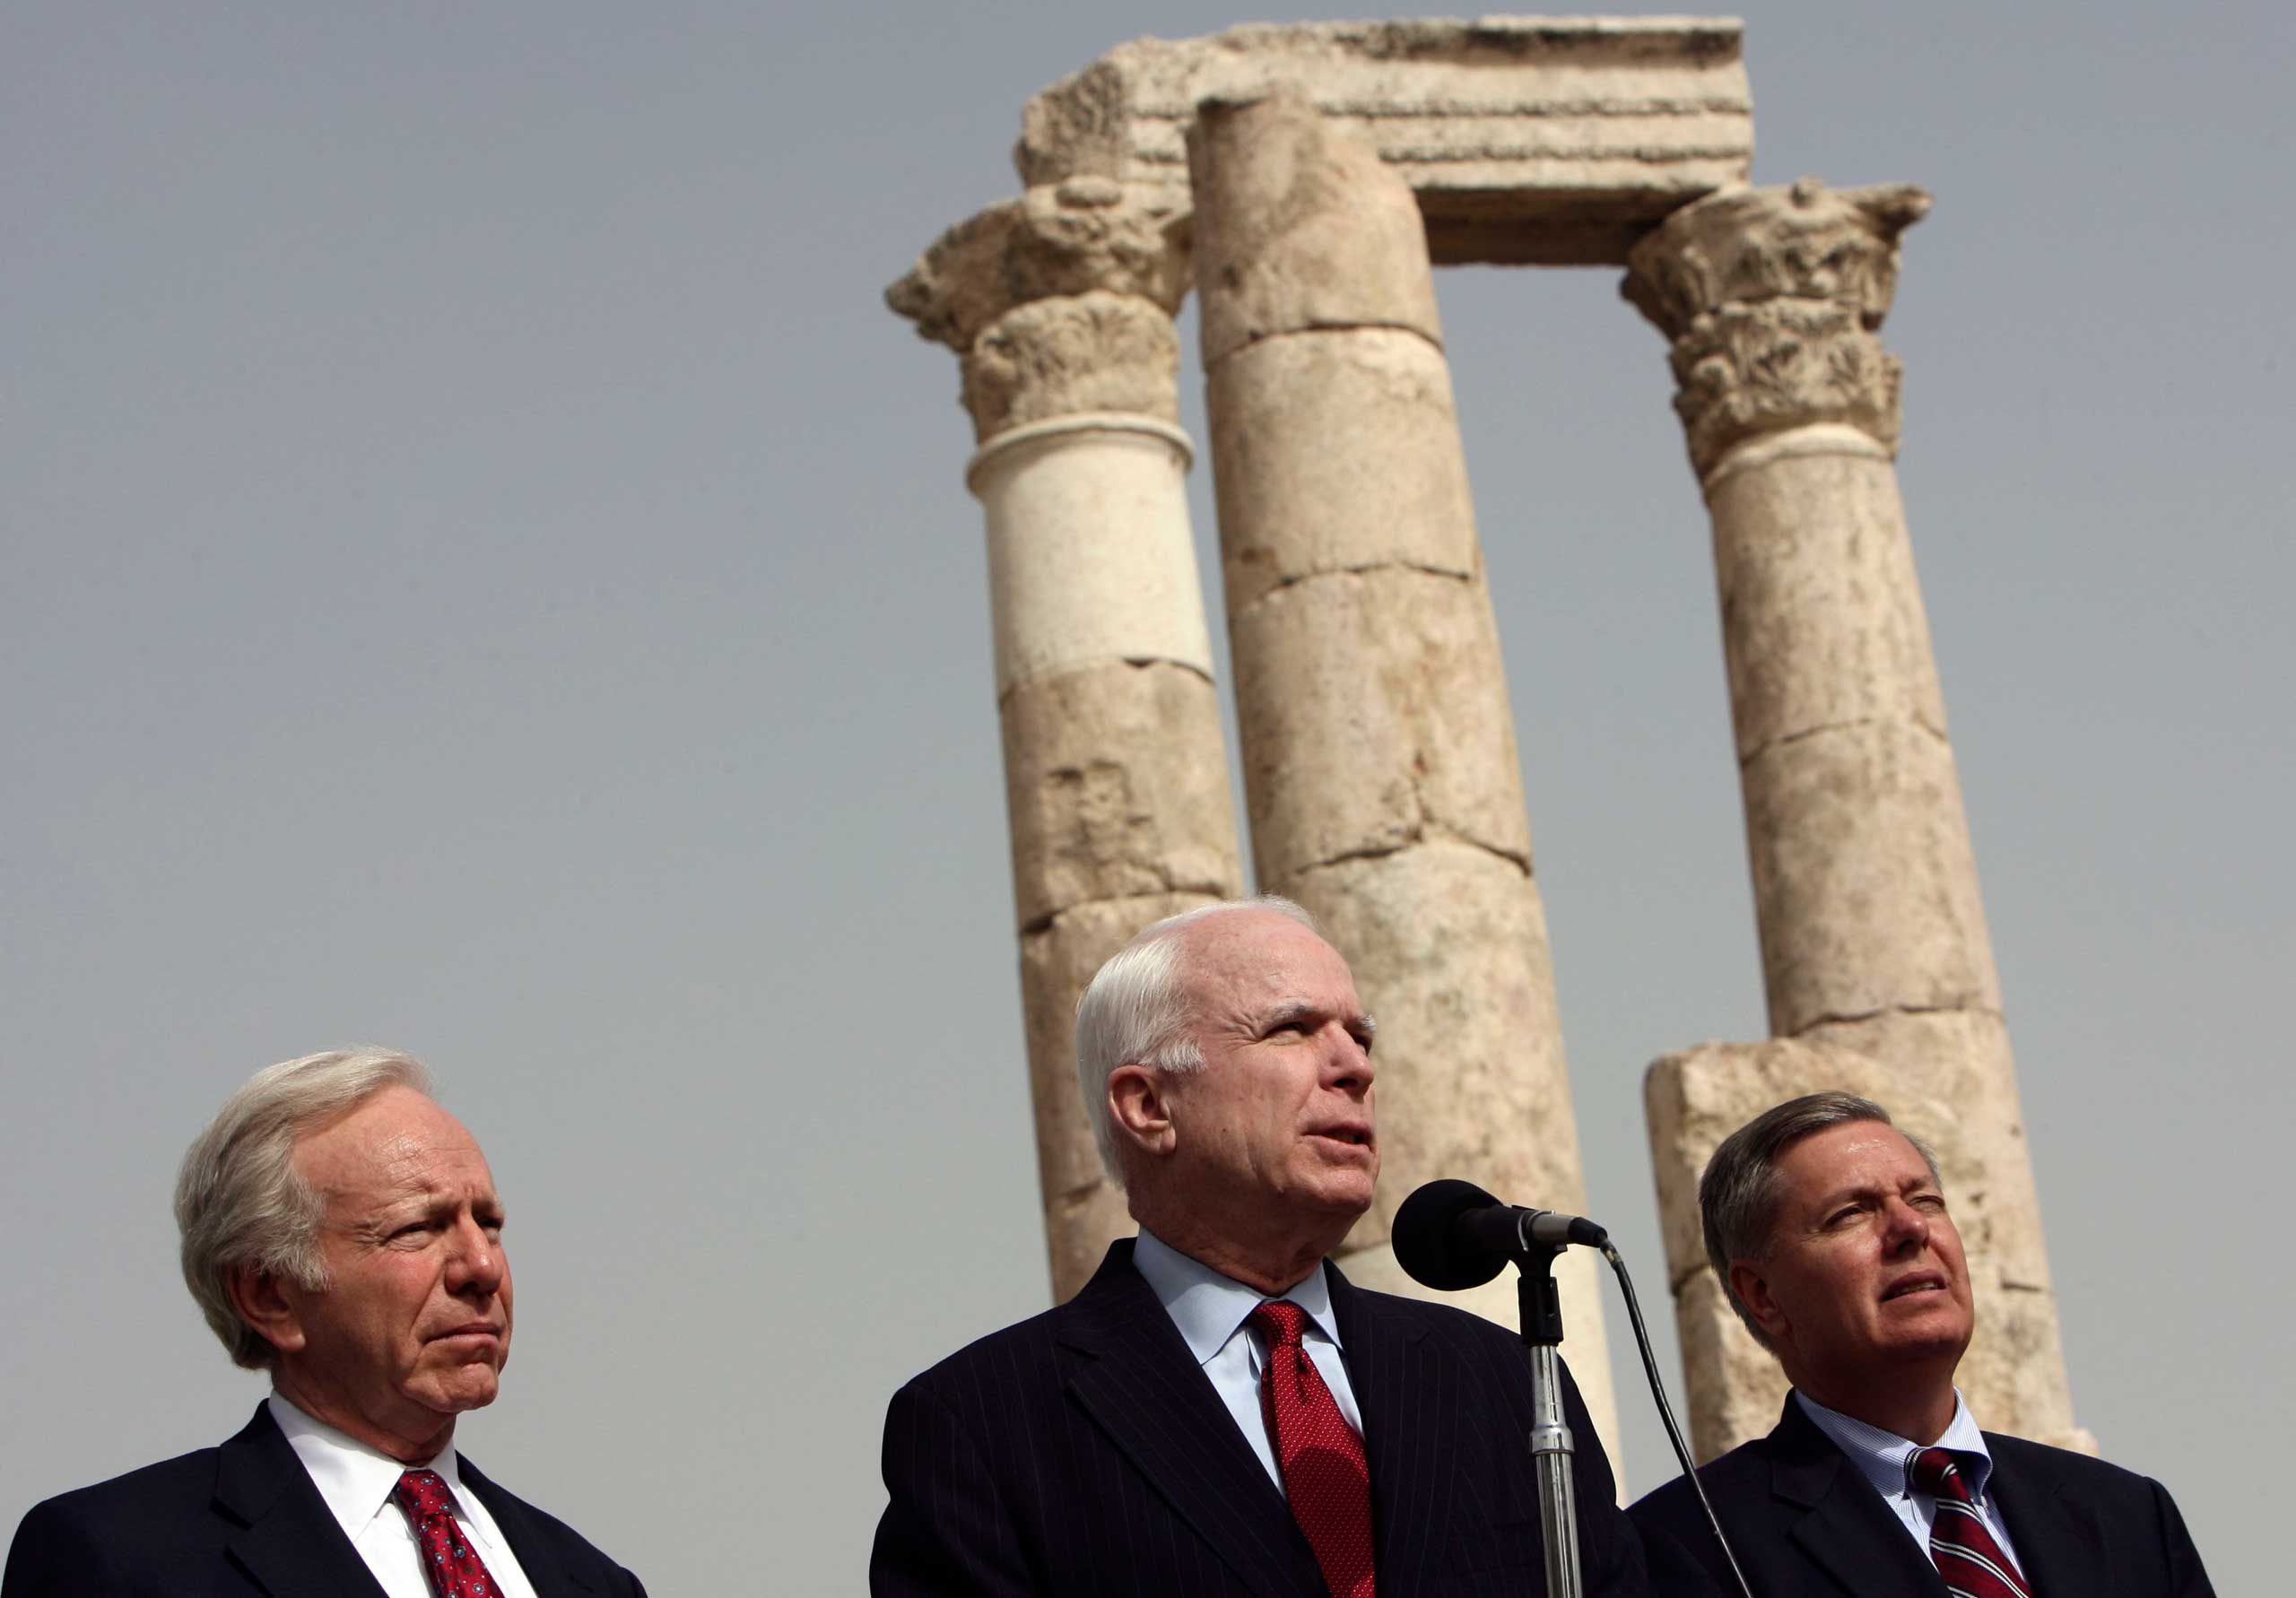 They even accompanied him on a campaign trip to Amman, Jordan, in 2008.